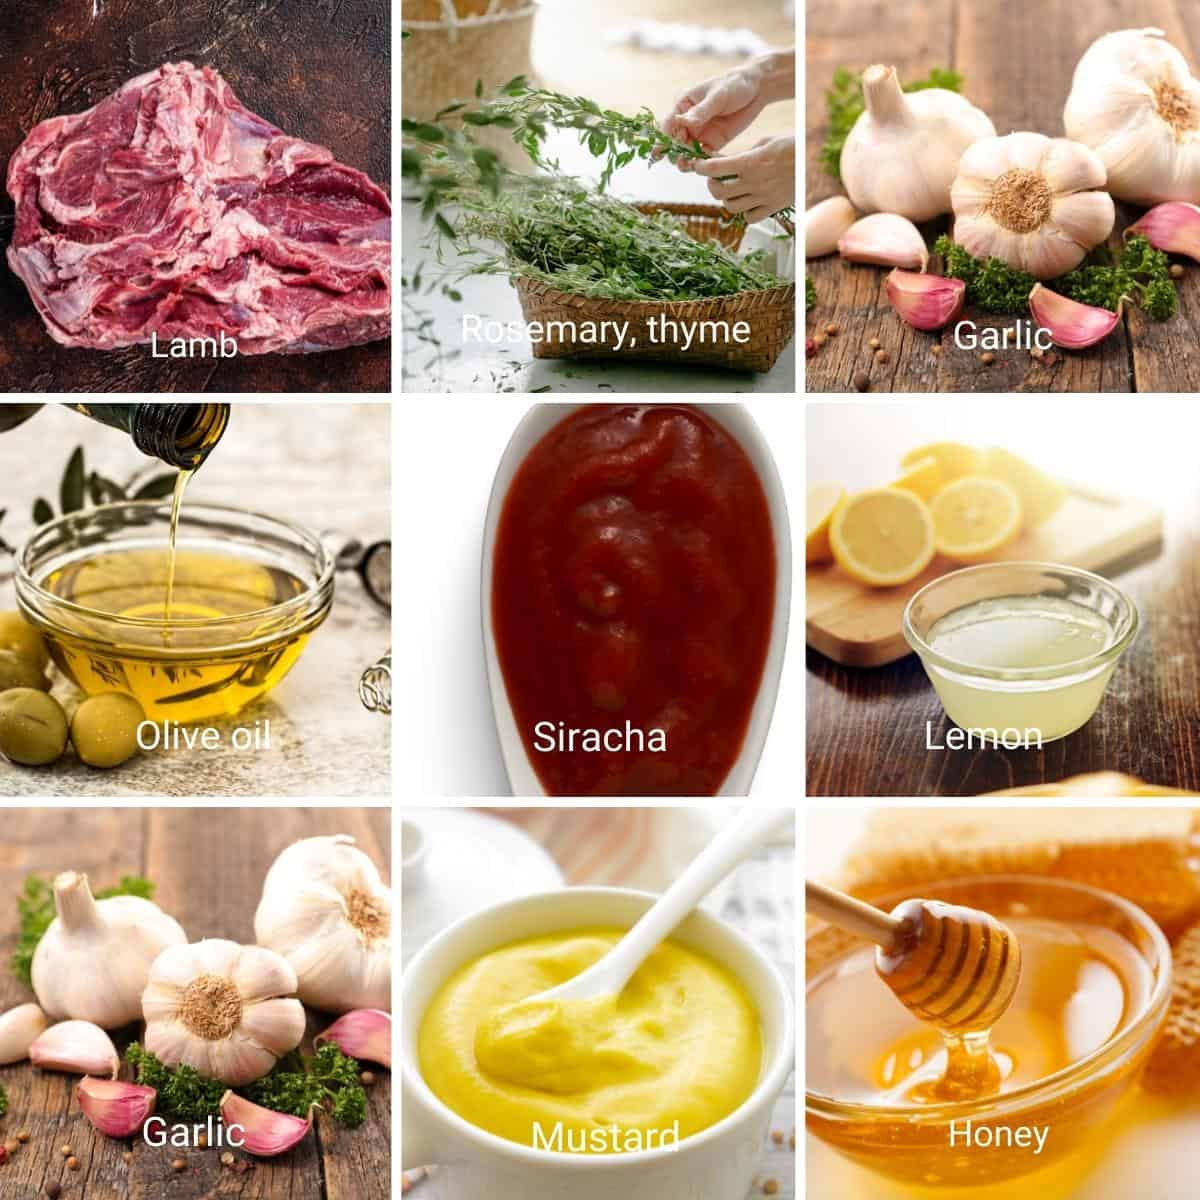 Ingredients for roast lamb with honey mustard.